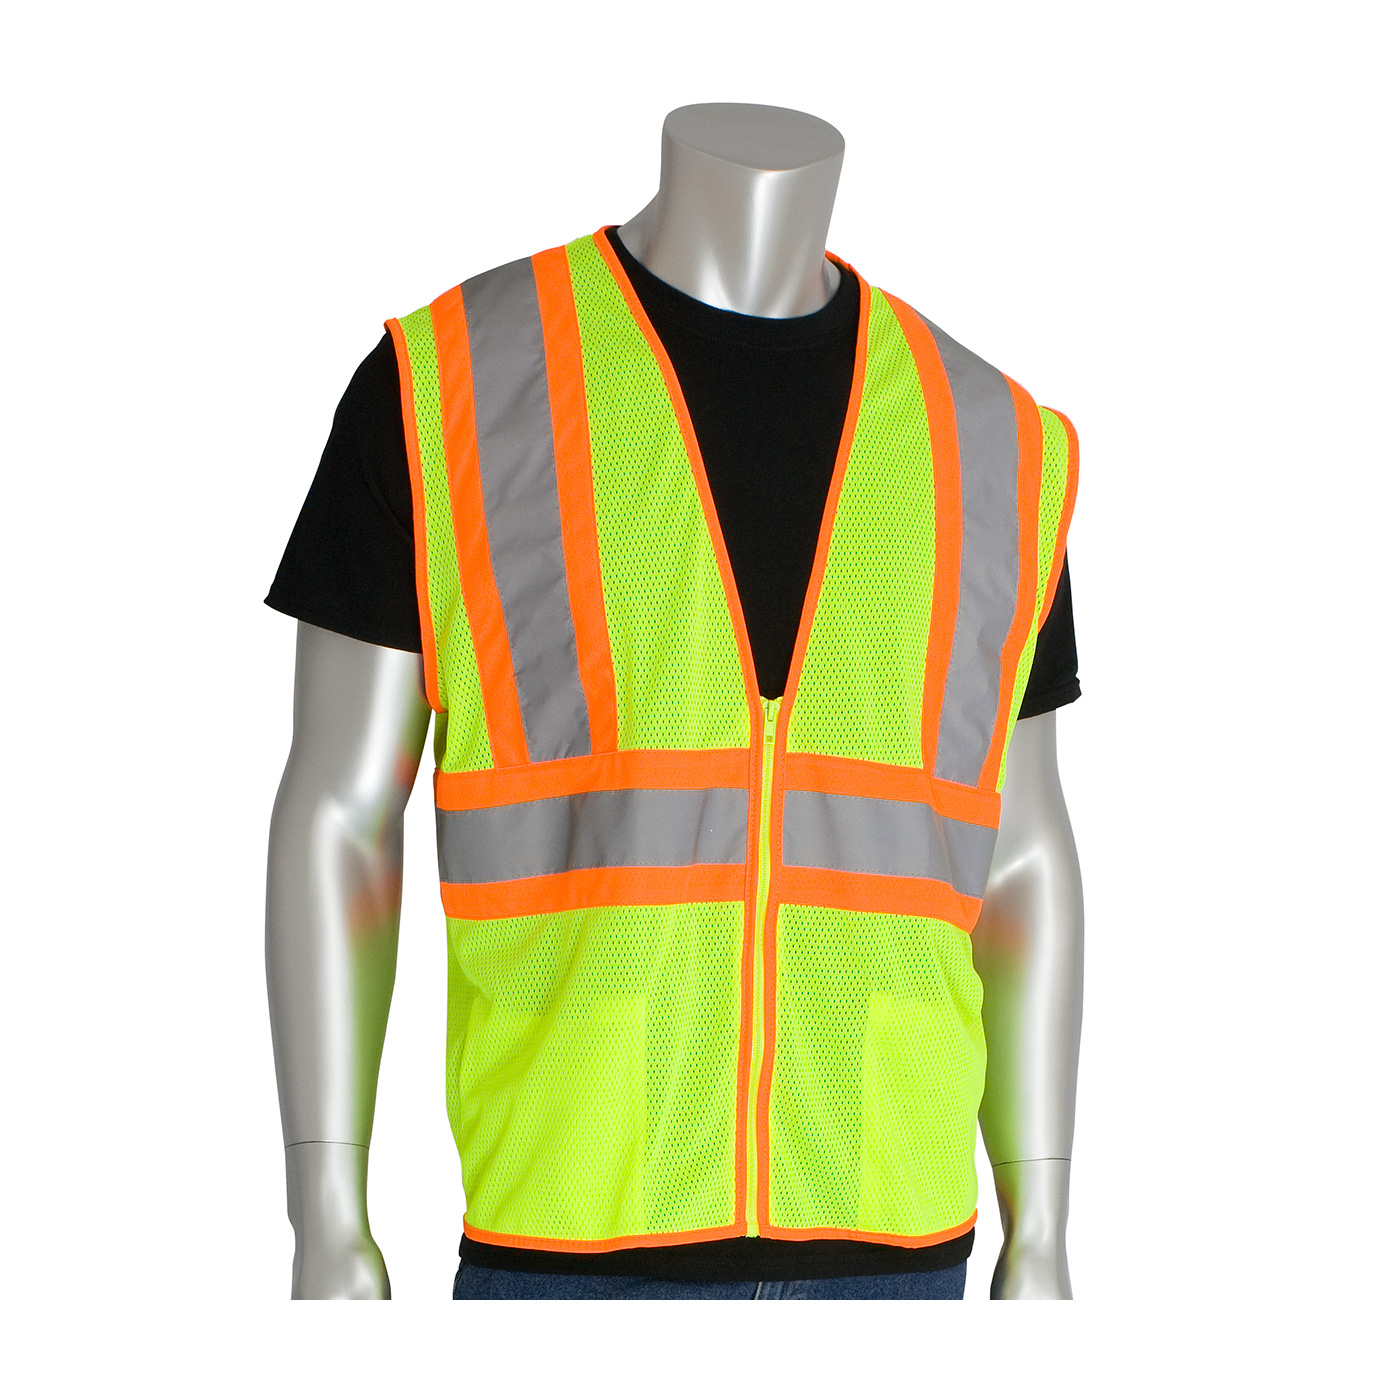 PIP 302-MVLY-XL ANSI Type R Class 2 Yellow Value Two-Tone Mesh Vest - X-Large PID-302 MVLY XL